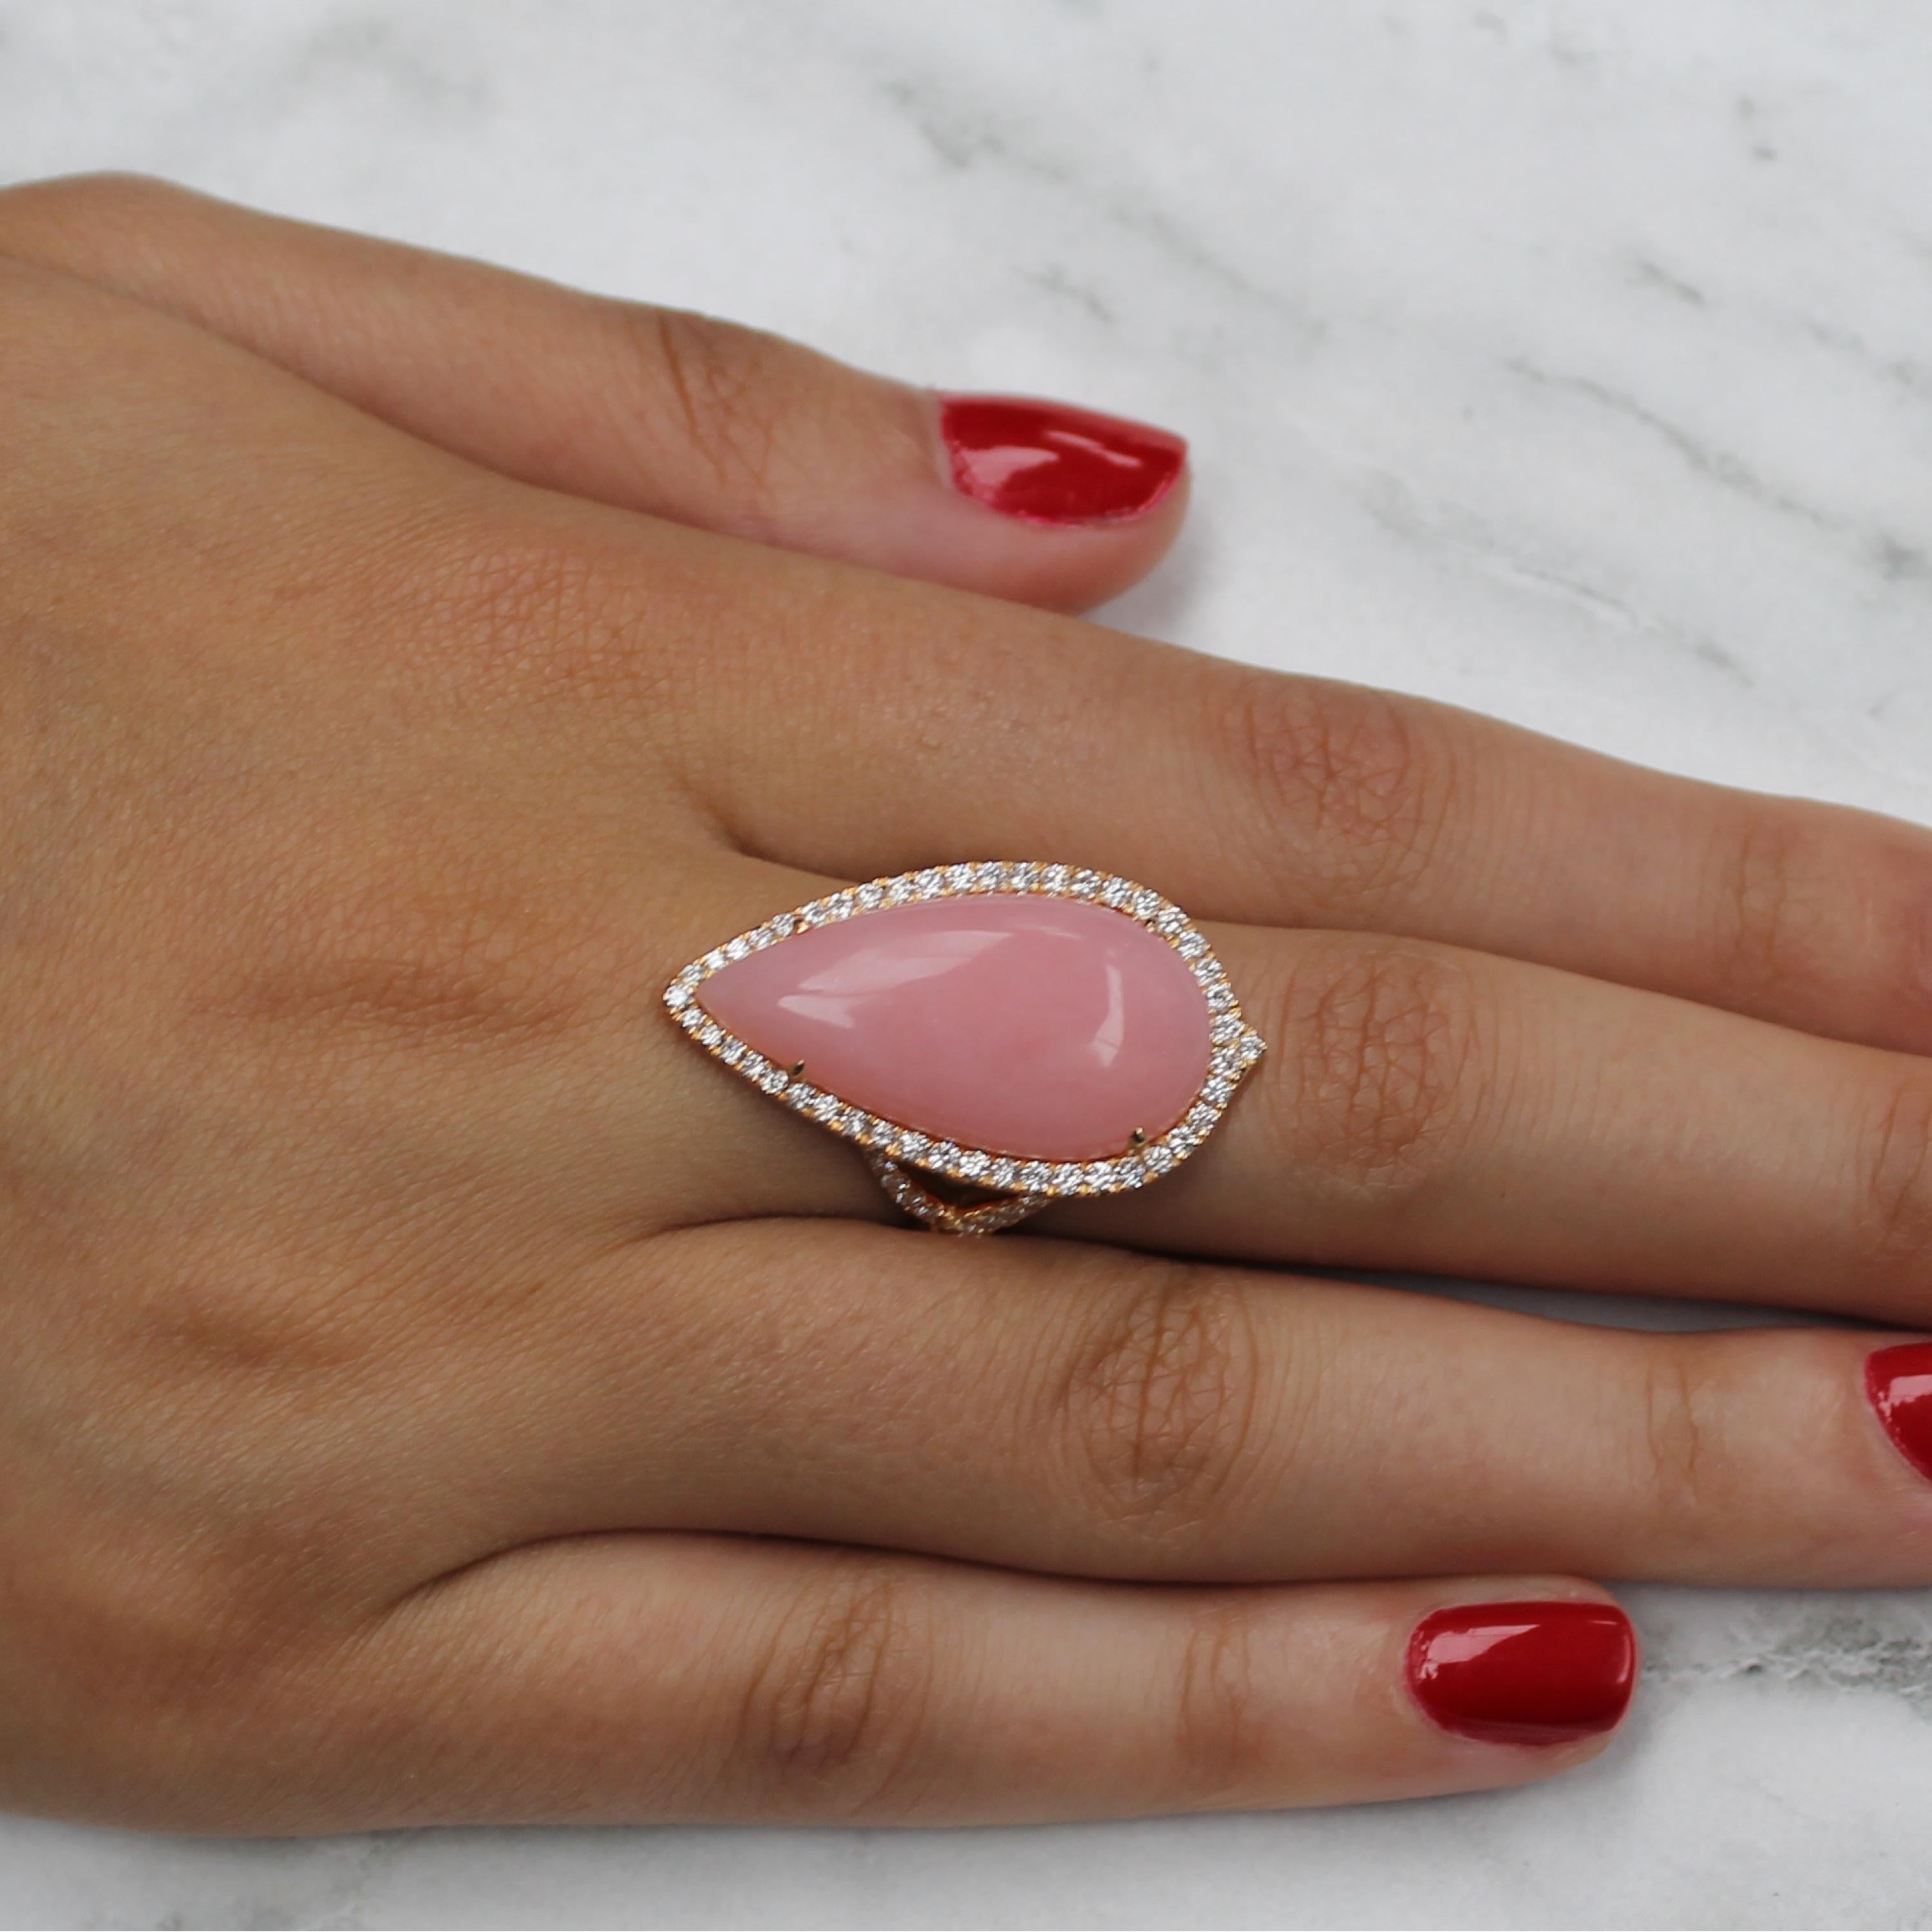 Pear-shape Cabochon-cut Pink Opal ring, with diamond halo, split diamond shank, set in 18K rose gold. A versatile ring that can be worn in either north or south direction. Finger size 6.5, adjustable upon request/quote. Pink Opal is a powerful